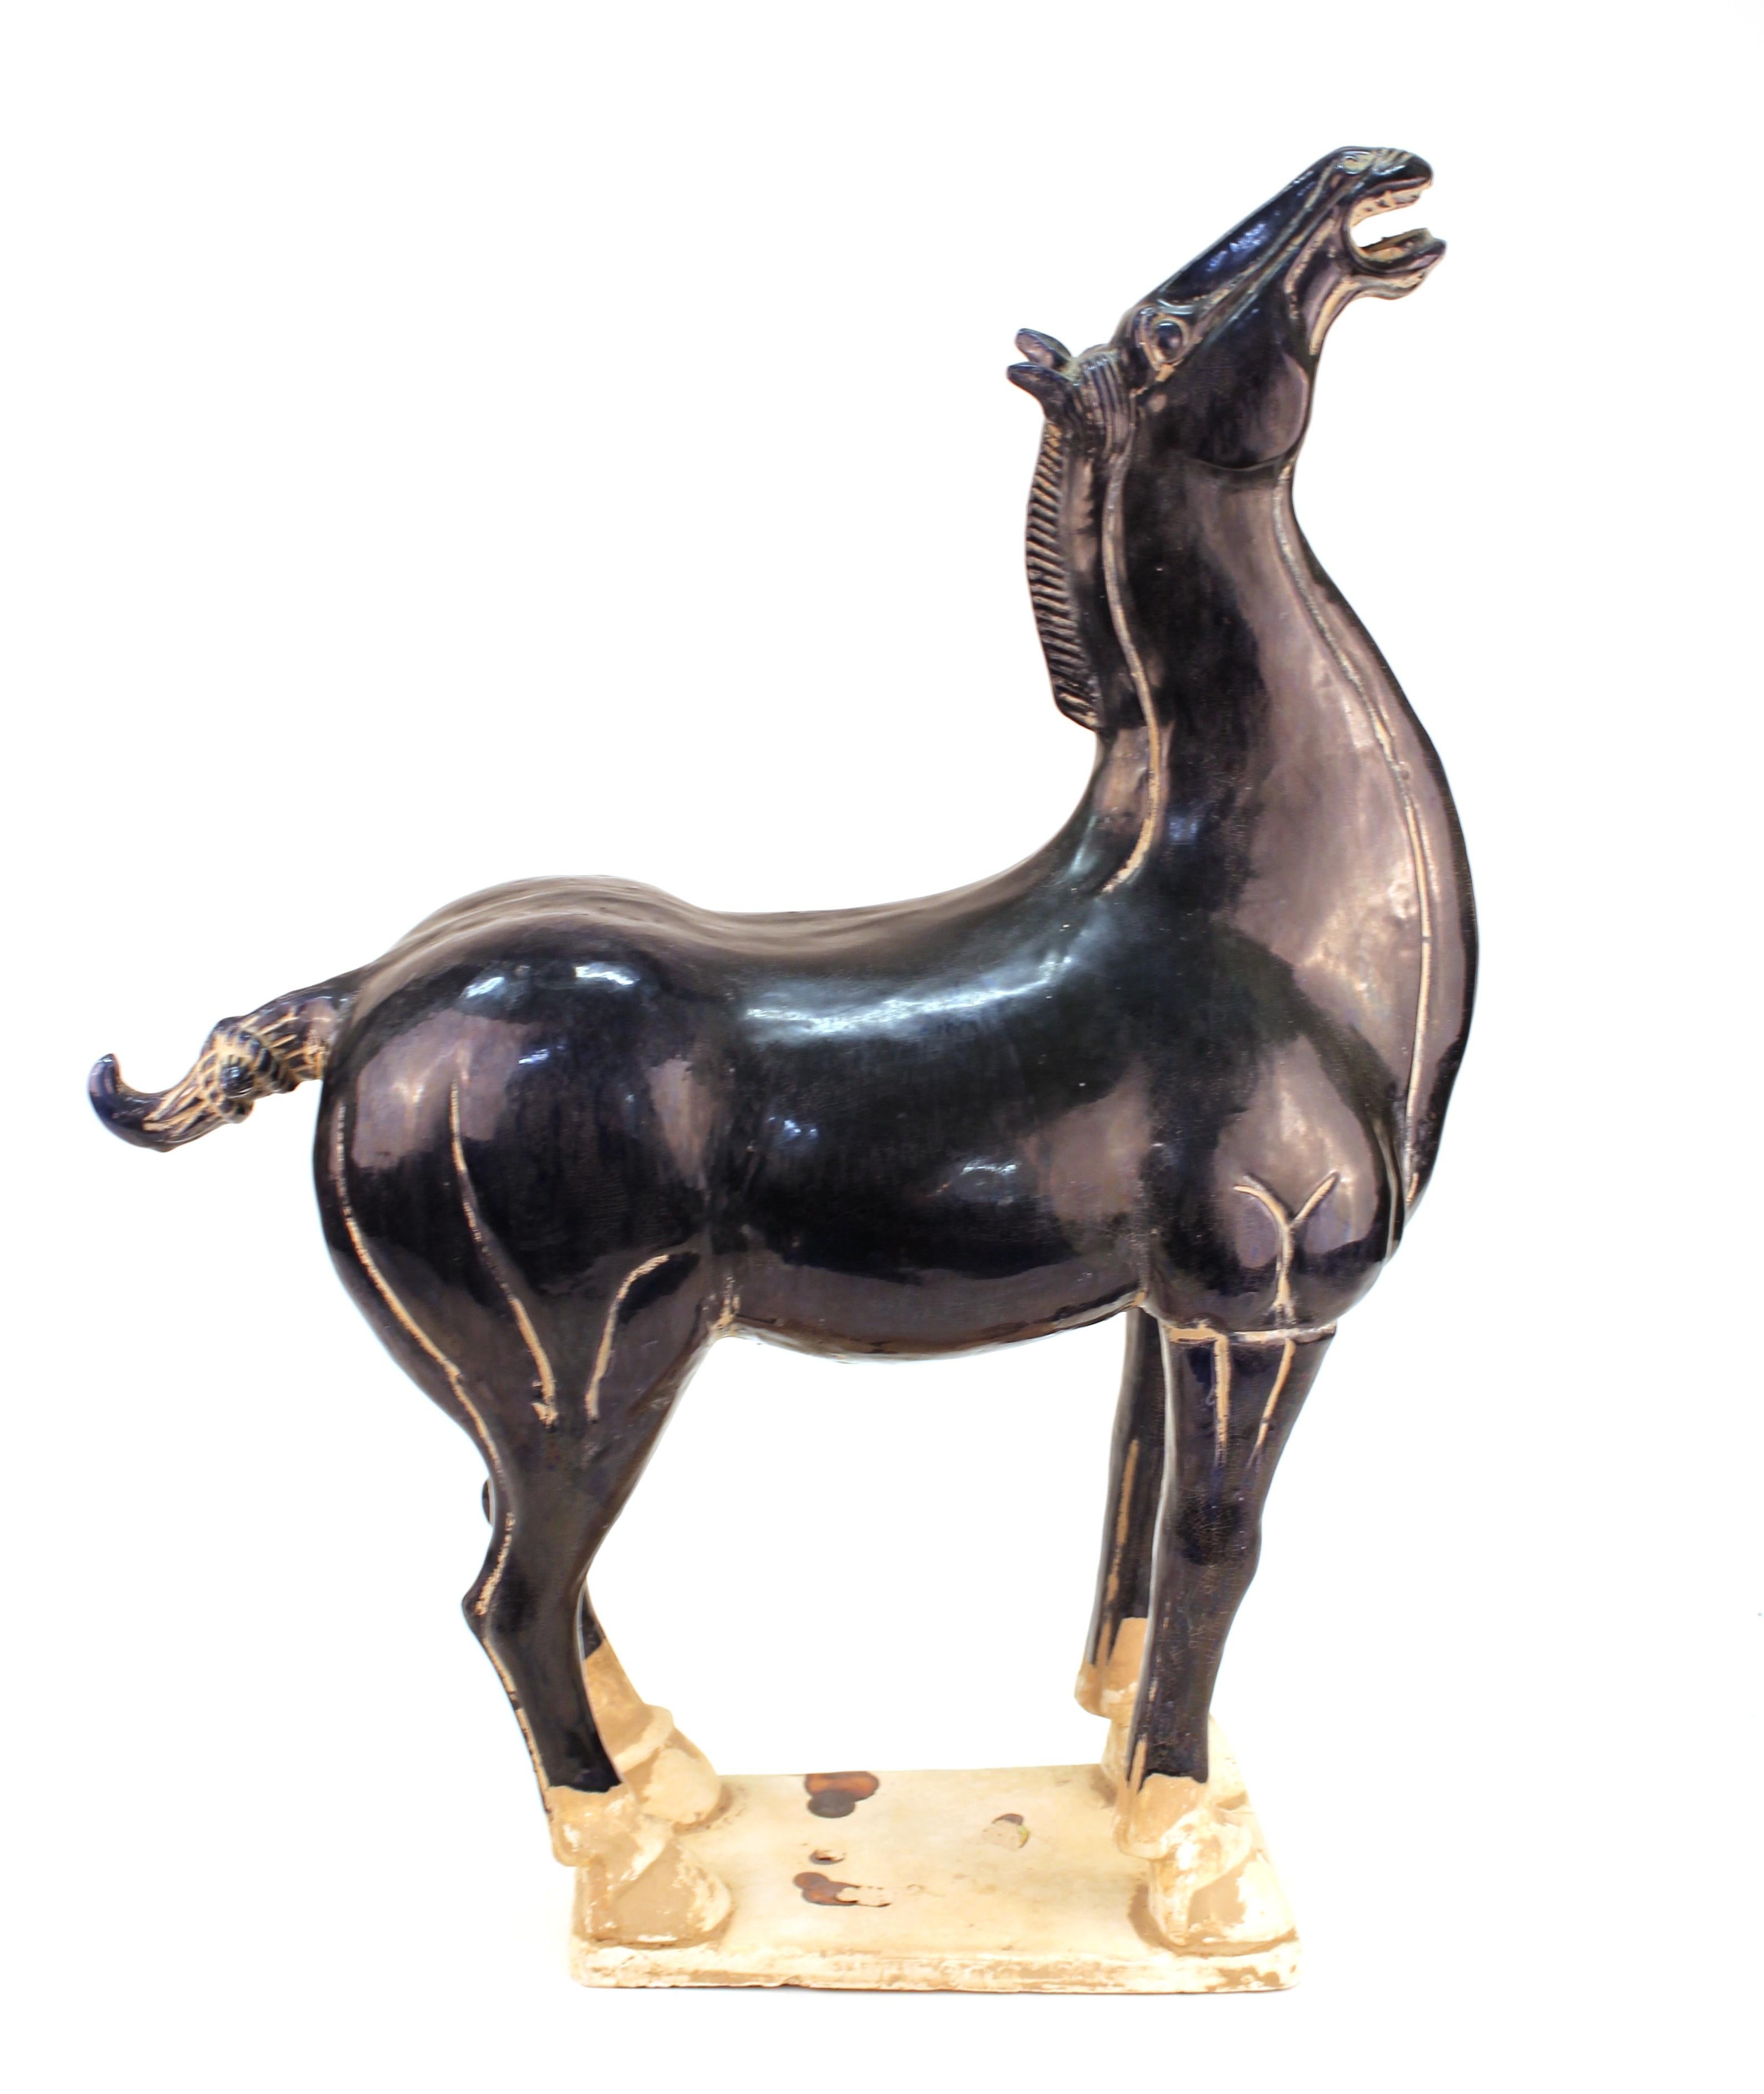 Glazed Chinese Tang Style Terracotta Horse Sculpture in Dark Blue Glaze and Drippings